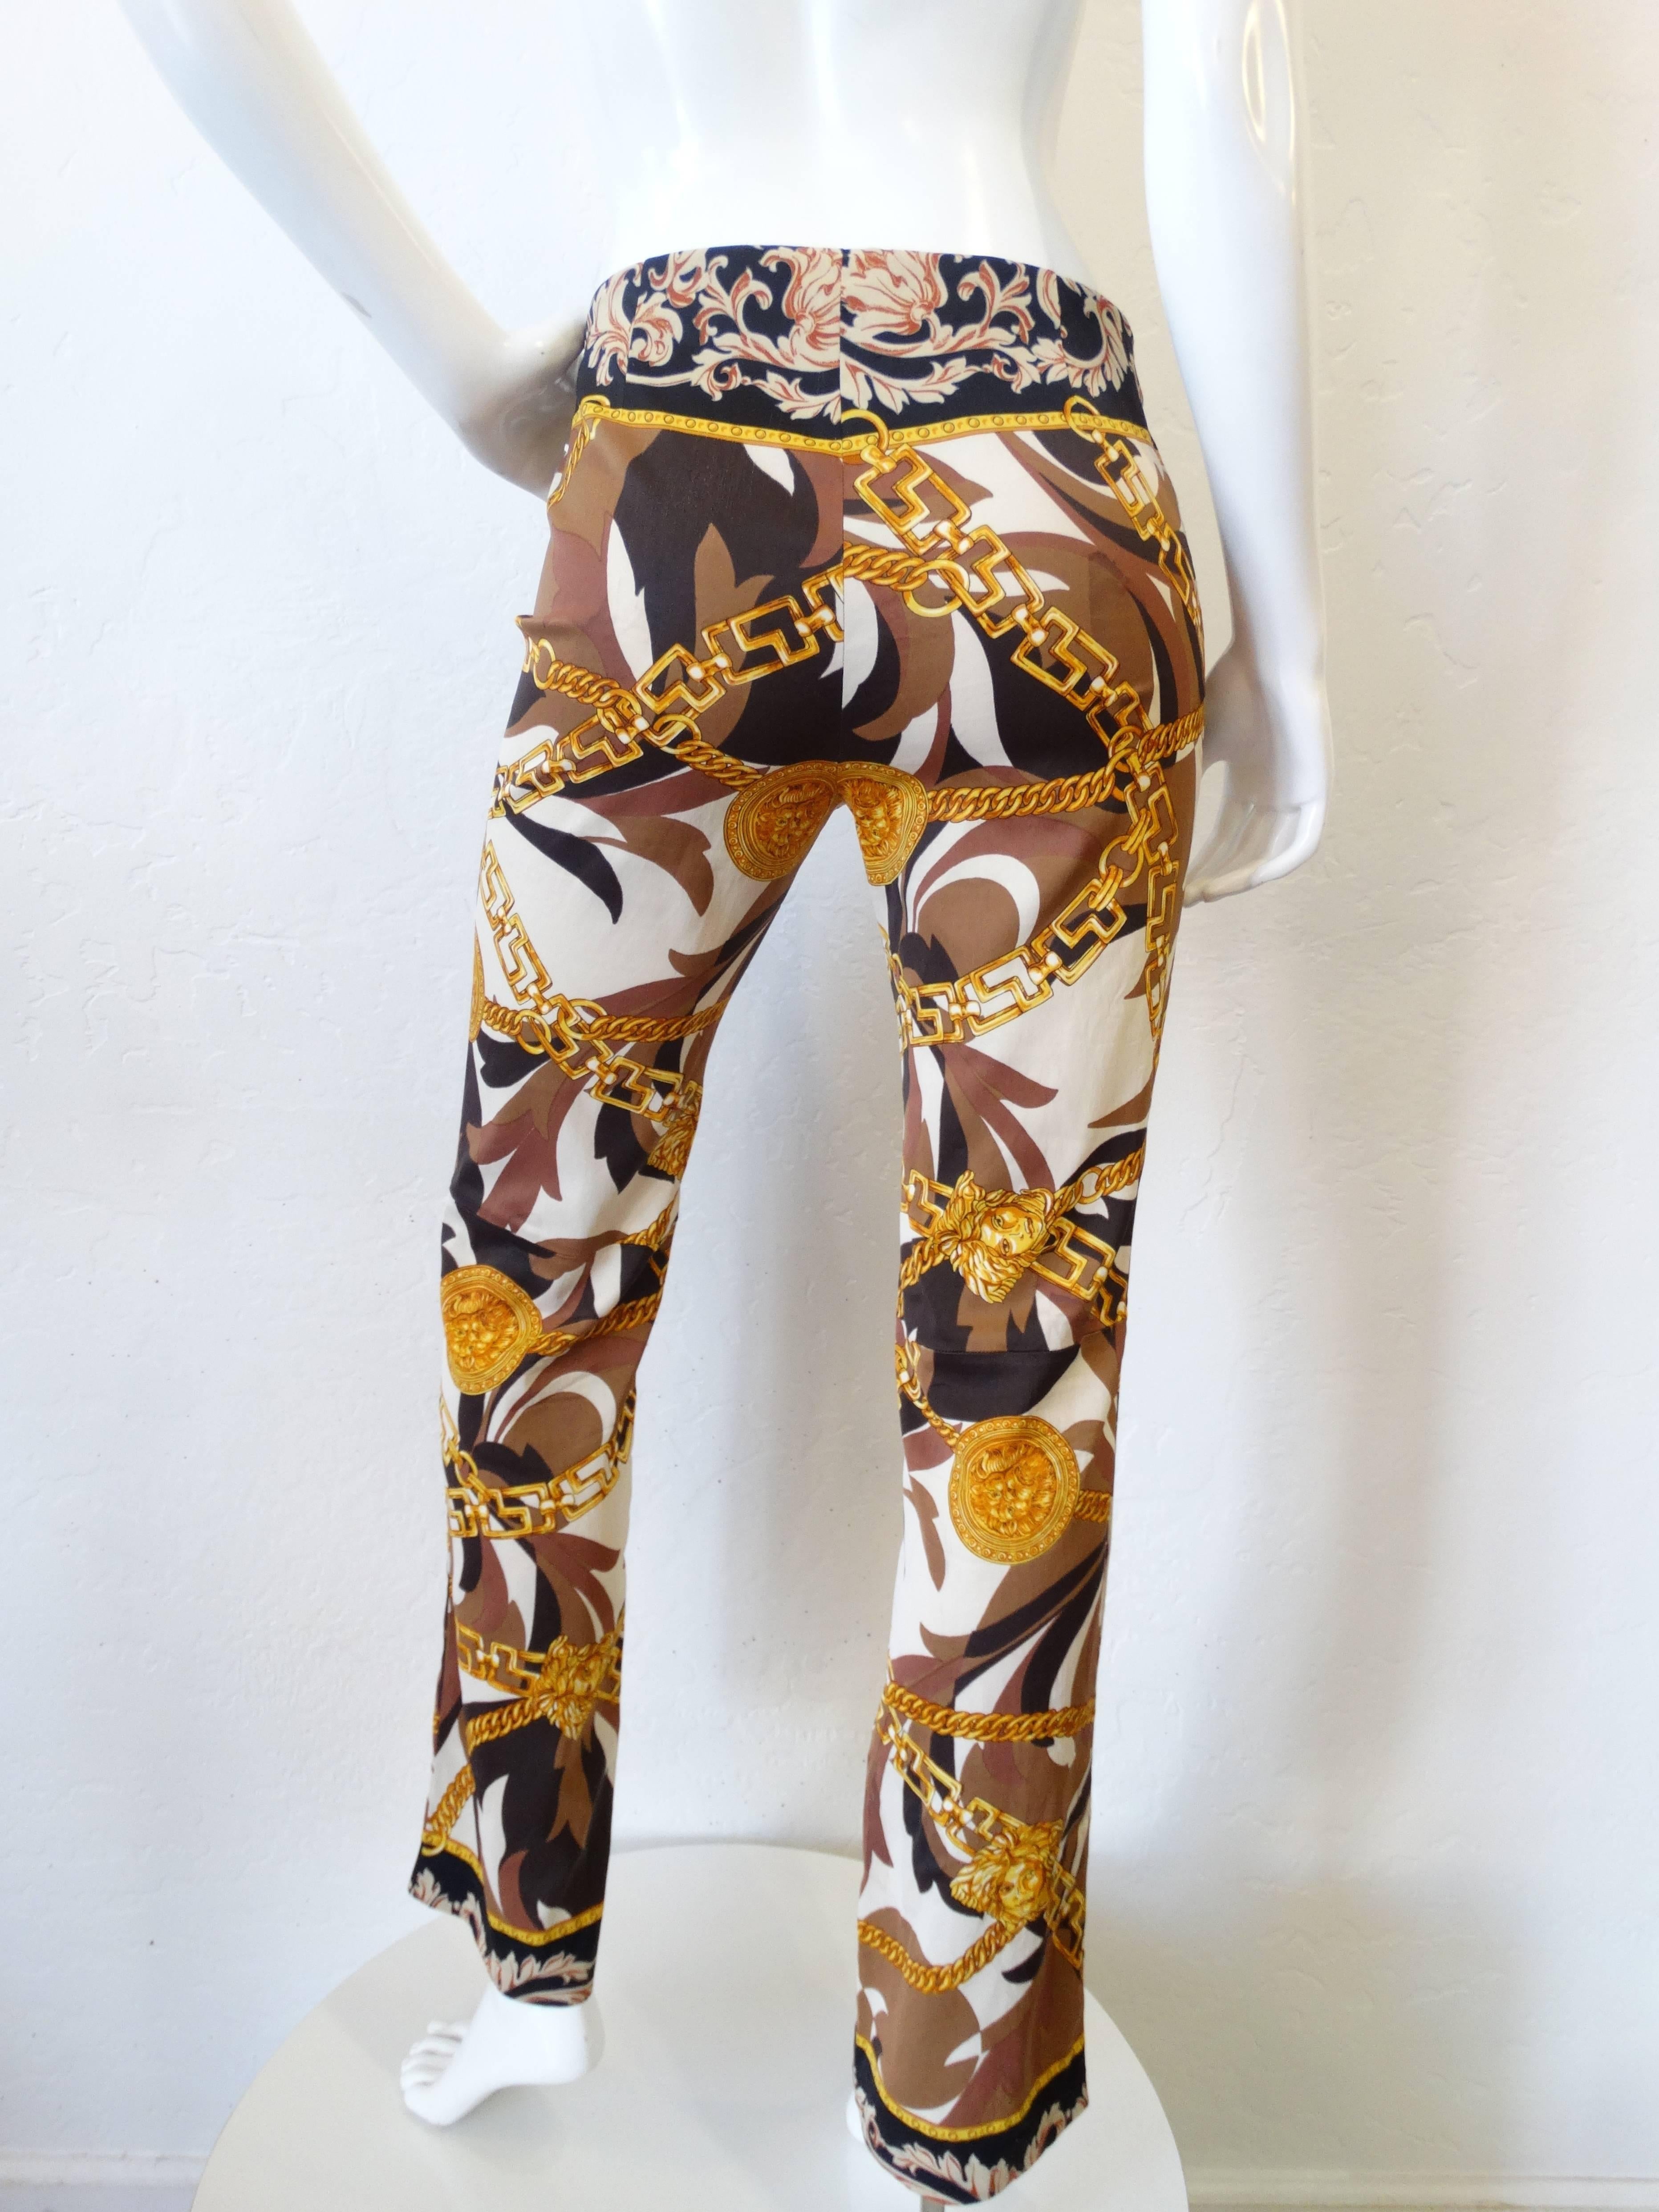 Fabulous pair of late 80's GIANNI VERSACE Jeans Couture Trousers/Pants.
Slightly elasticated fabric which hugs the body nicely, the pants are mid-rise, fabric has a abstract prints with Lion and Medusa head printed details with iconic Versace chain